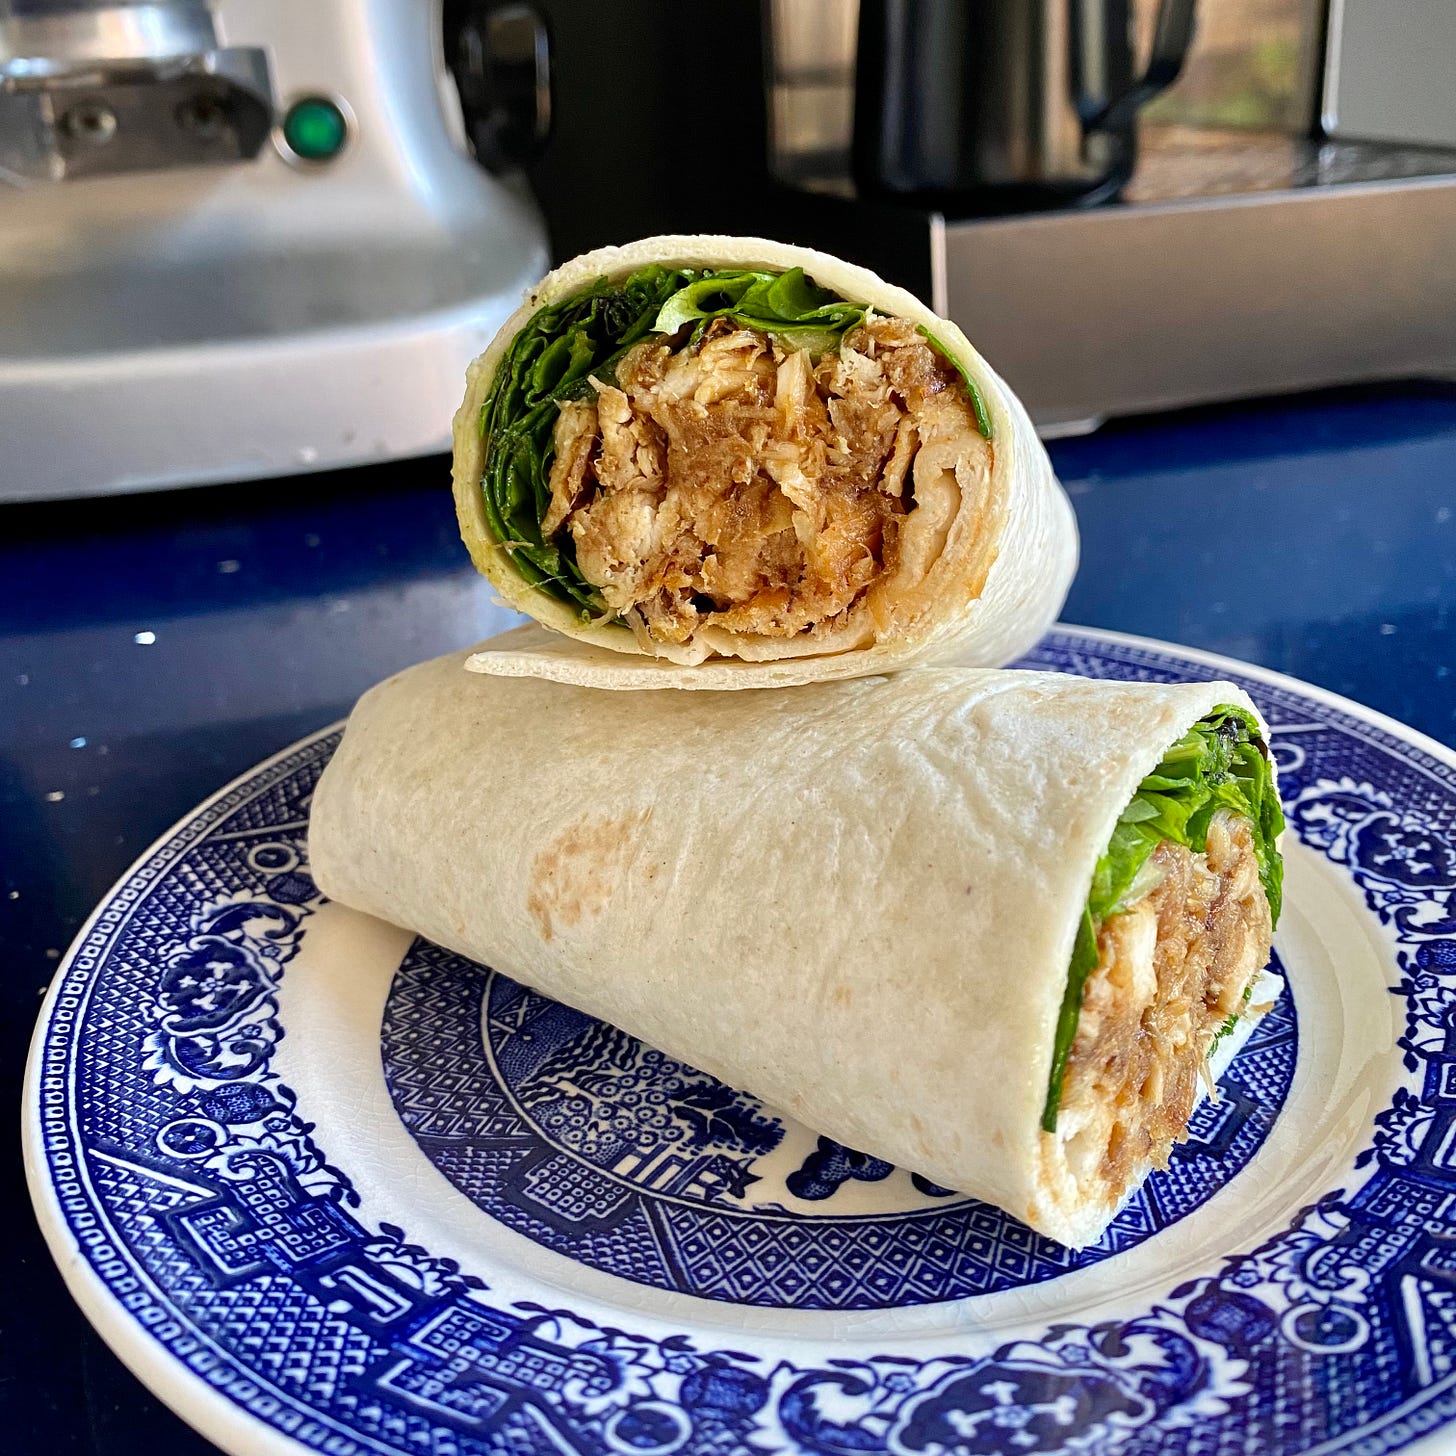 Blue and white plate with a cut-open sandwich wrap filled with shredded chicken and salad